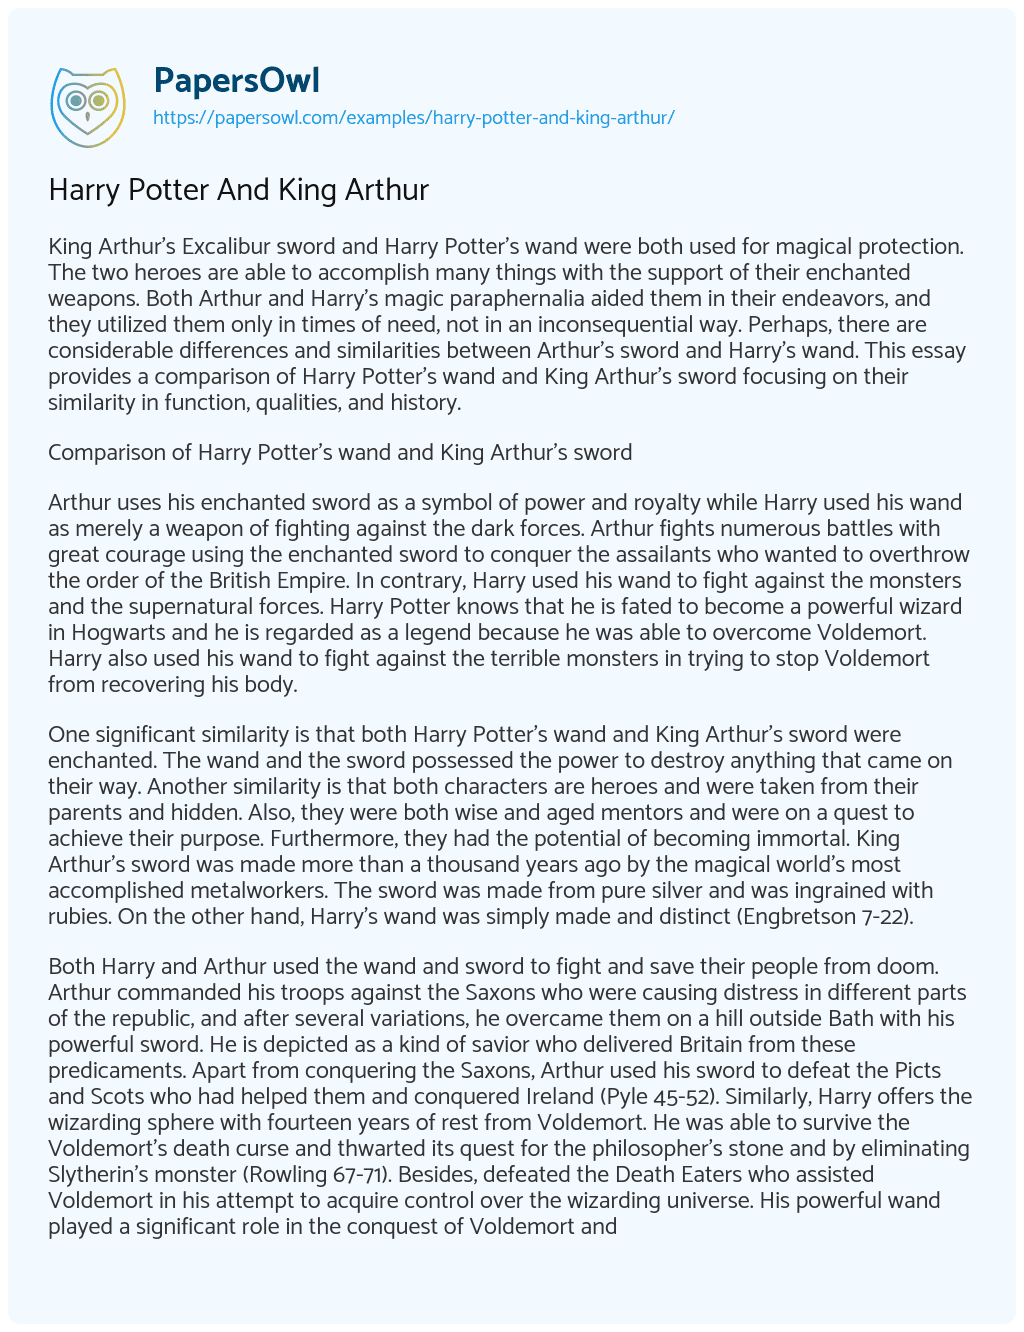 Essay on Harry Potter and King Arthur